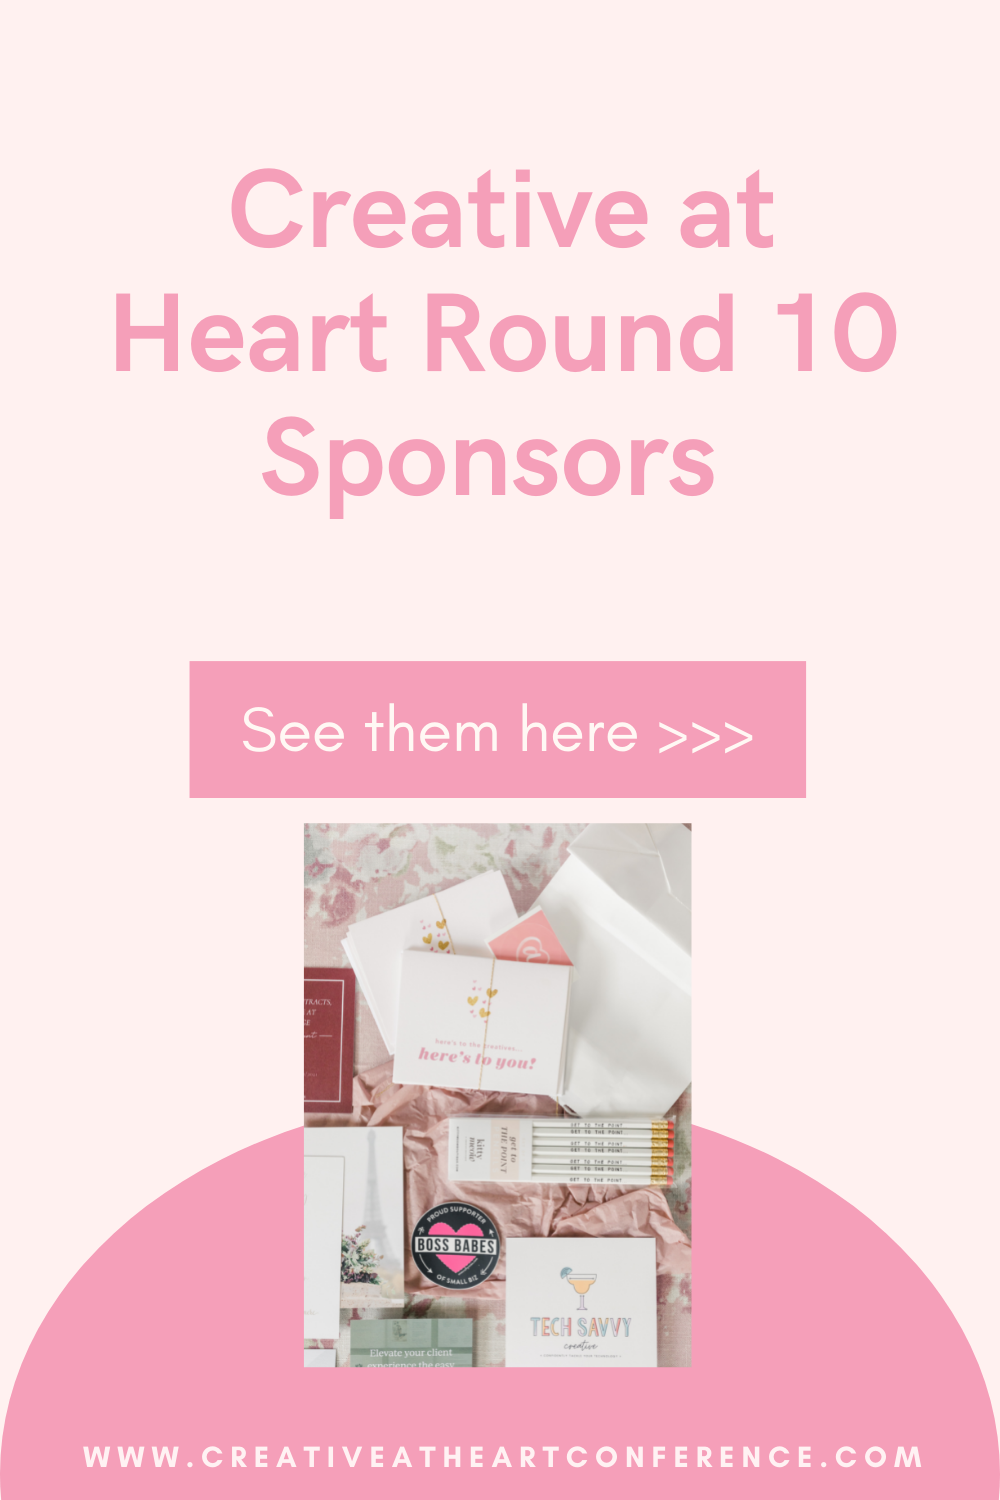 Creative at Heart Round 10 Sponsors: a look at sponsors, giveaways, and swag from C@H round 10 including Stationery HQ, Showit, and other small businesses